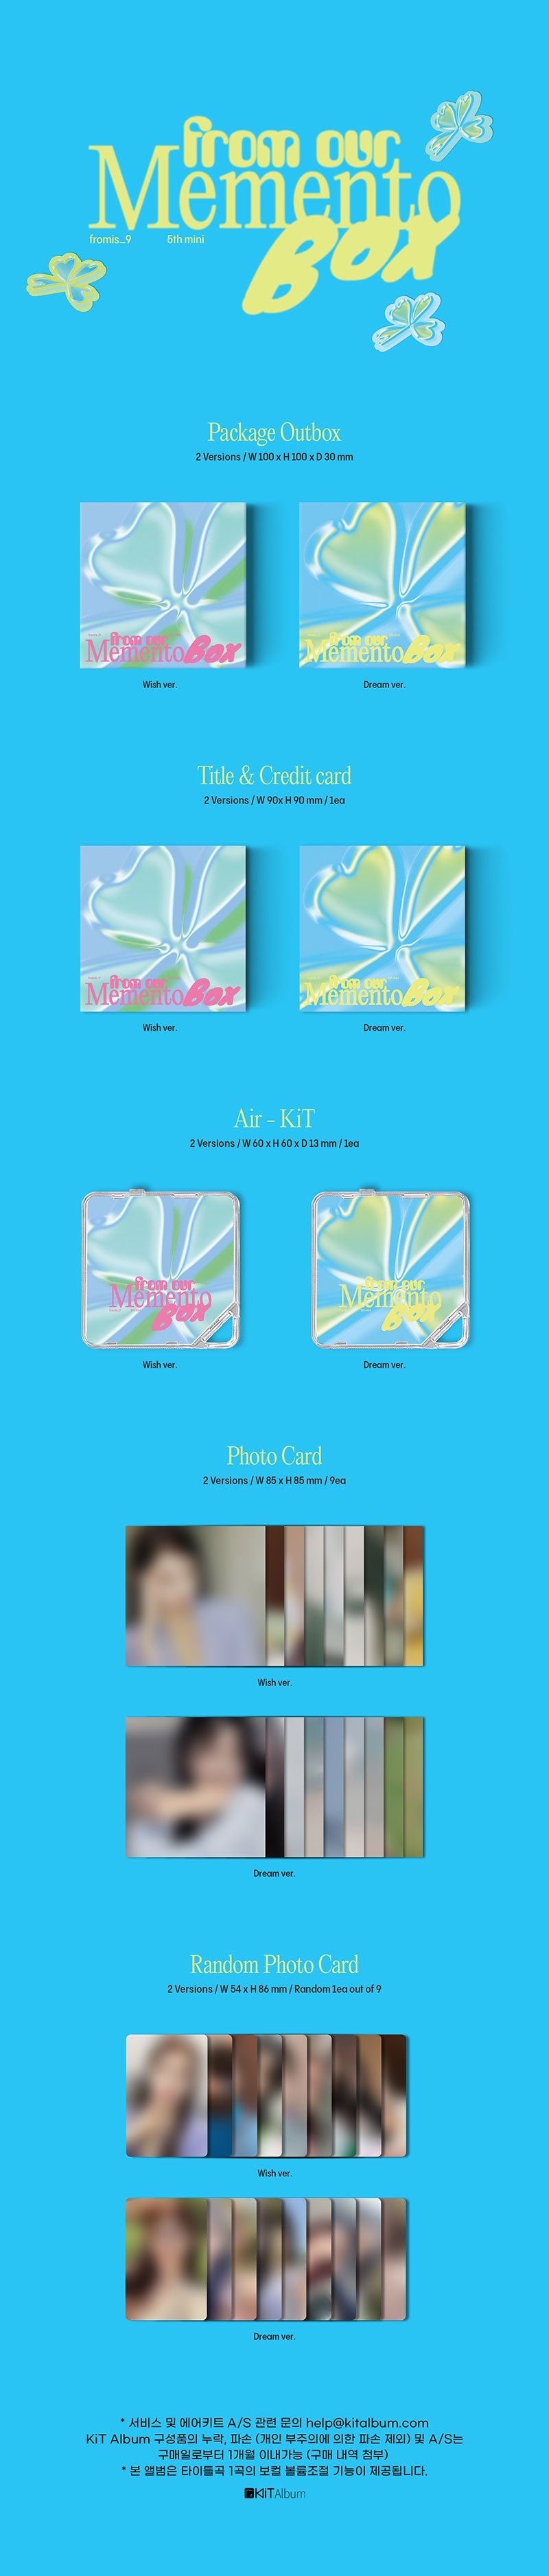 fromis_9 - from our Memento Box [5th Mini Album - KiT Ver.]